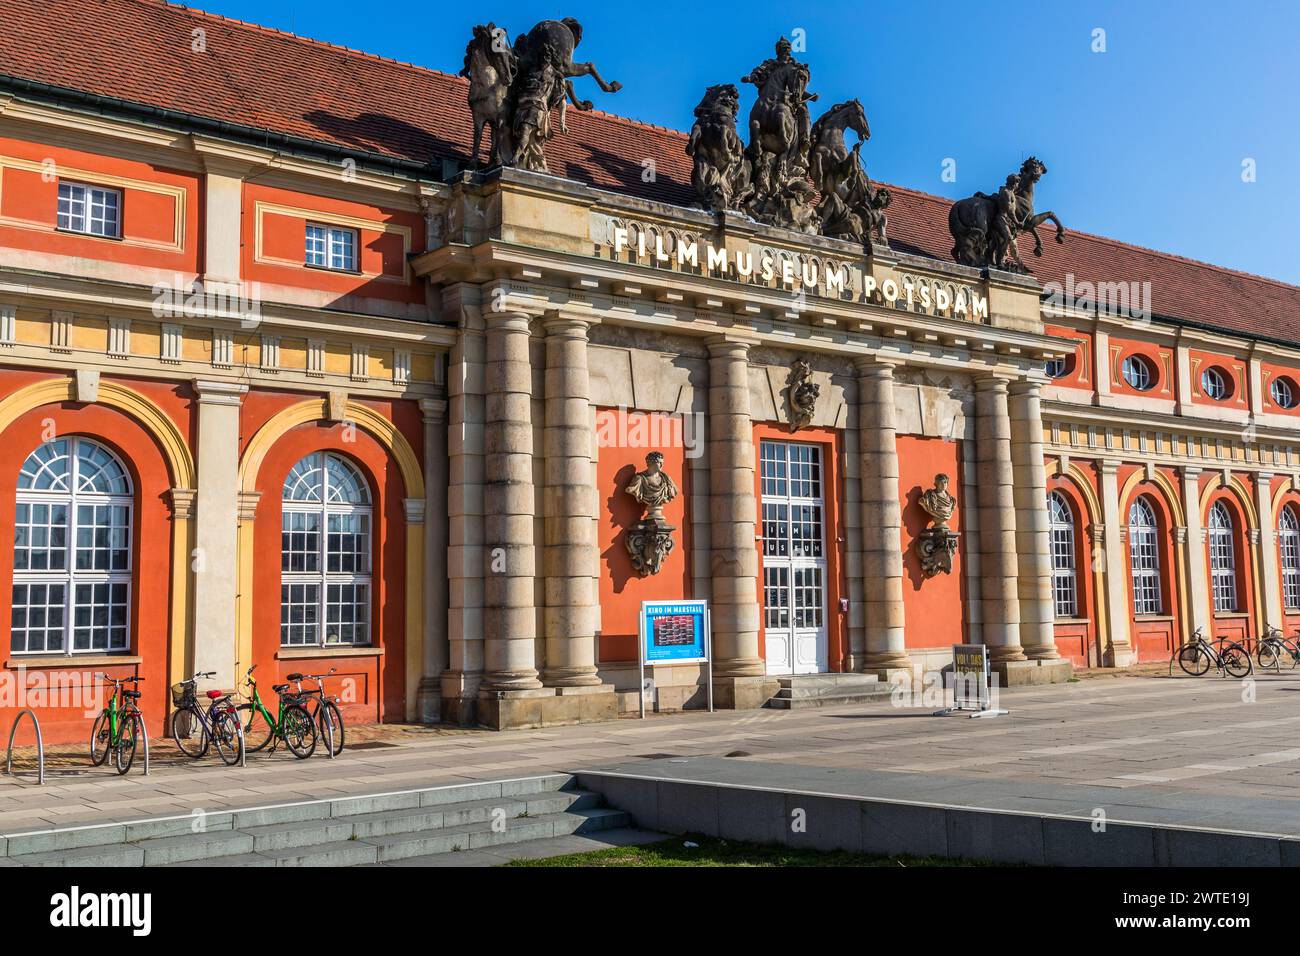 The Film Museum Potsdam is housed in the former stables, Potsdam, Brandenburg, Brandenburg, Germany. Filmmuseum Potsdam is the oldest film museum with its own collection and exhibitions in Germany Stock Photo